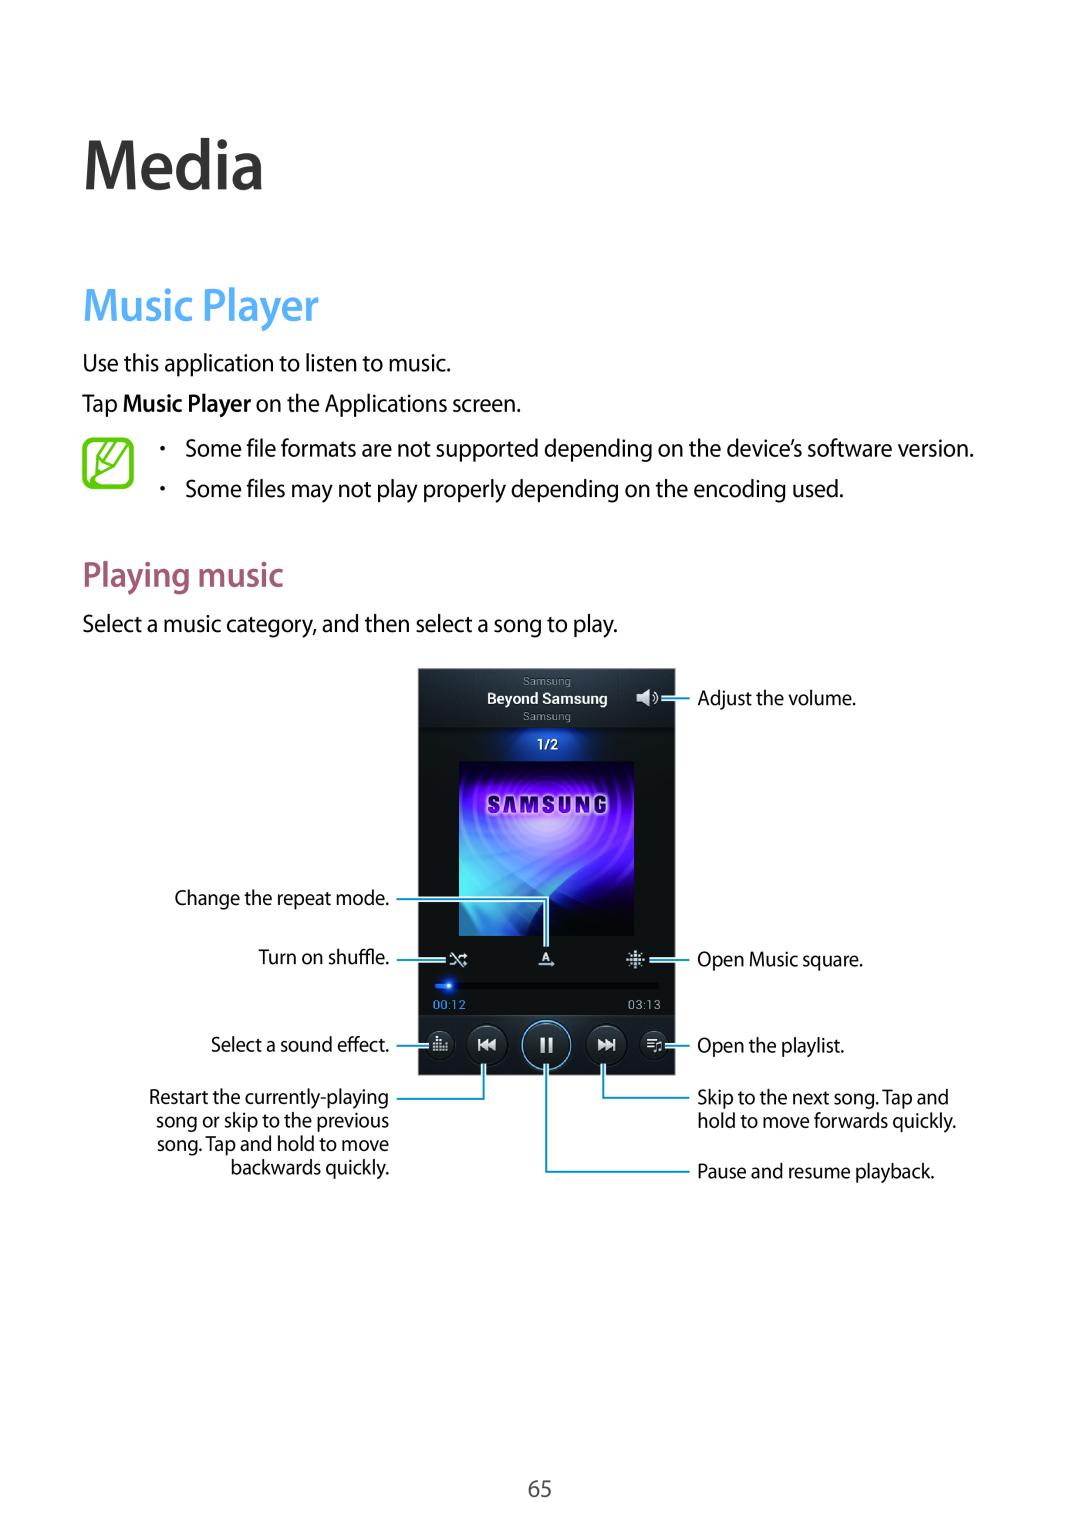 Samsung GT-I8190MBNPTR manual Media, Music Player, Playing music, Adjust the volume, Turn on shu e, Open Music square 